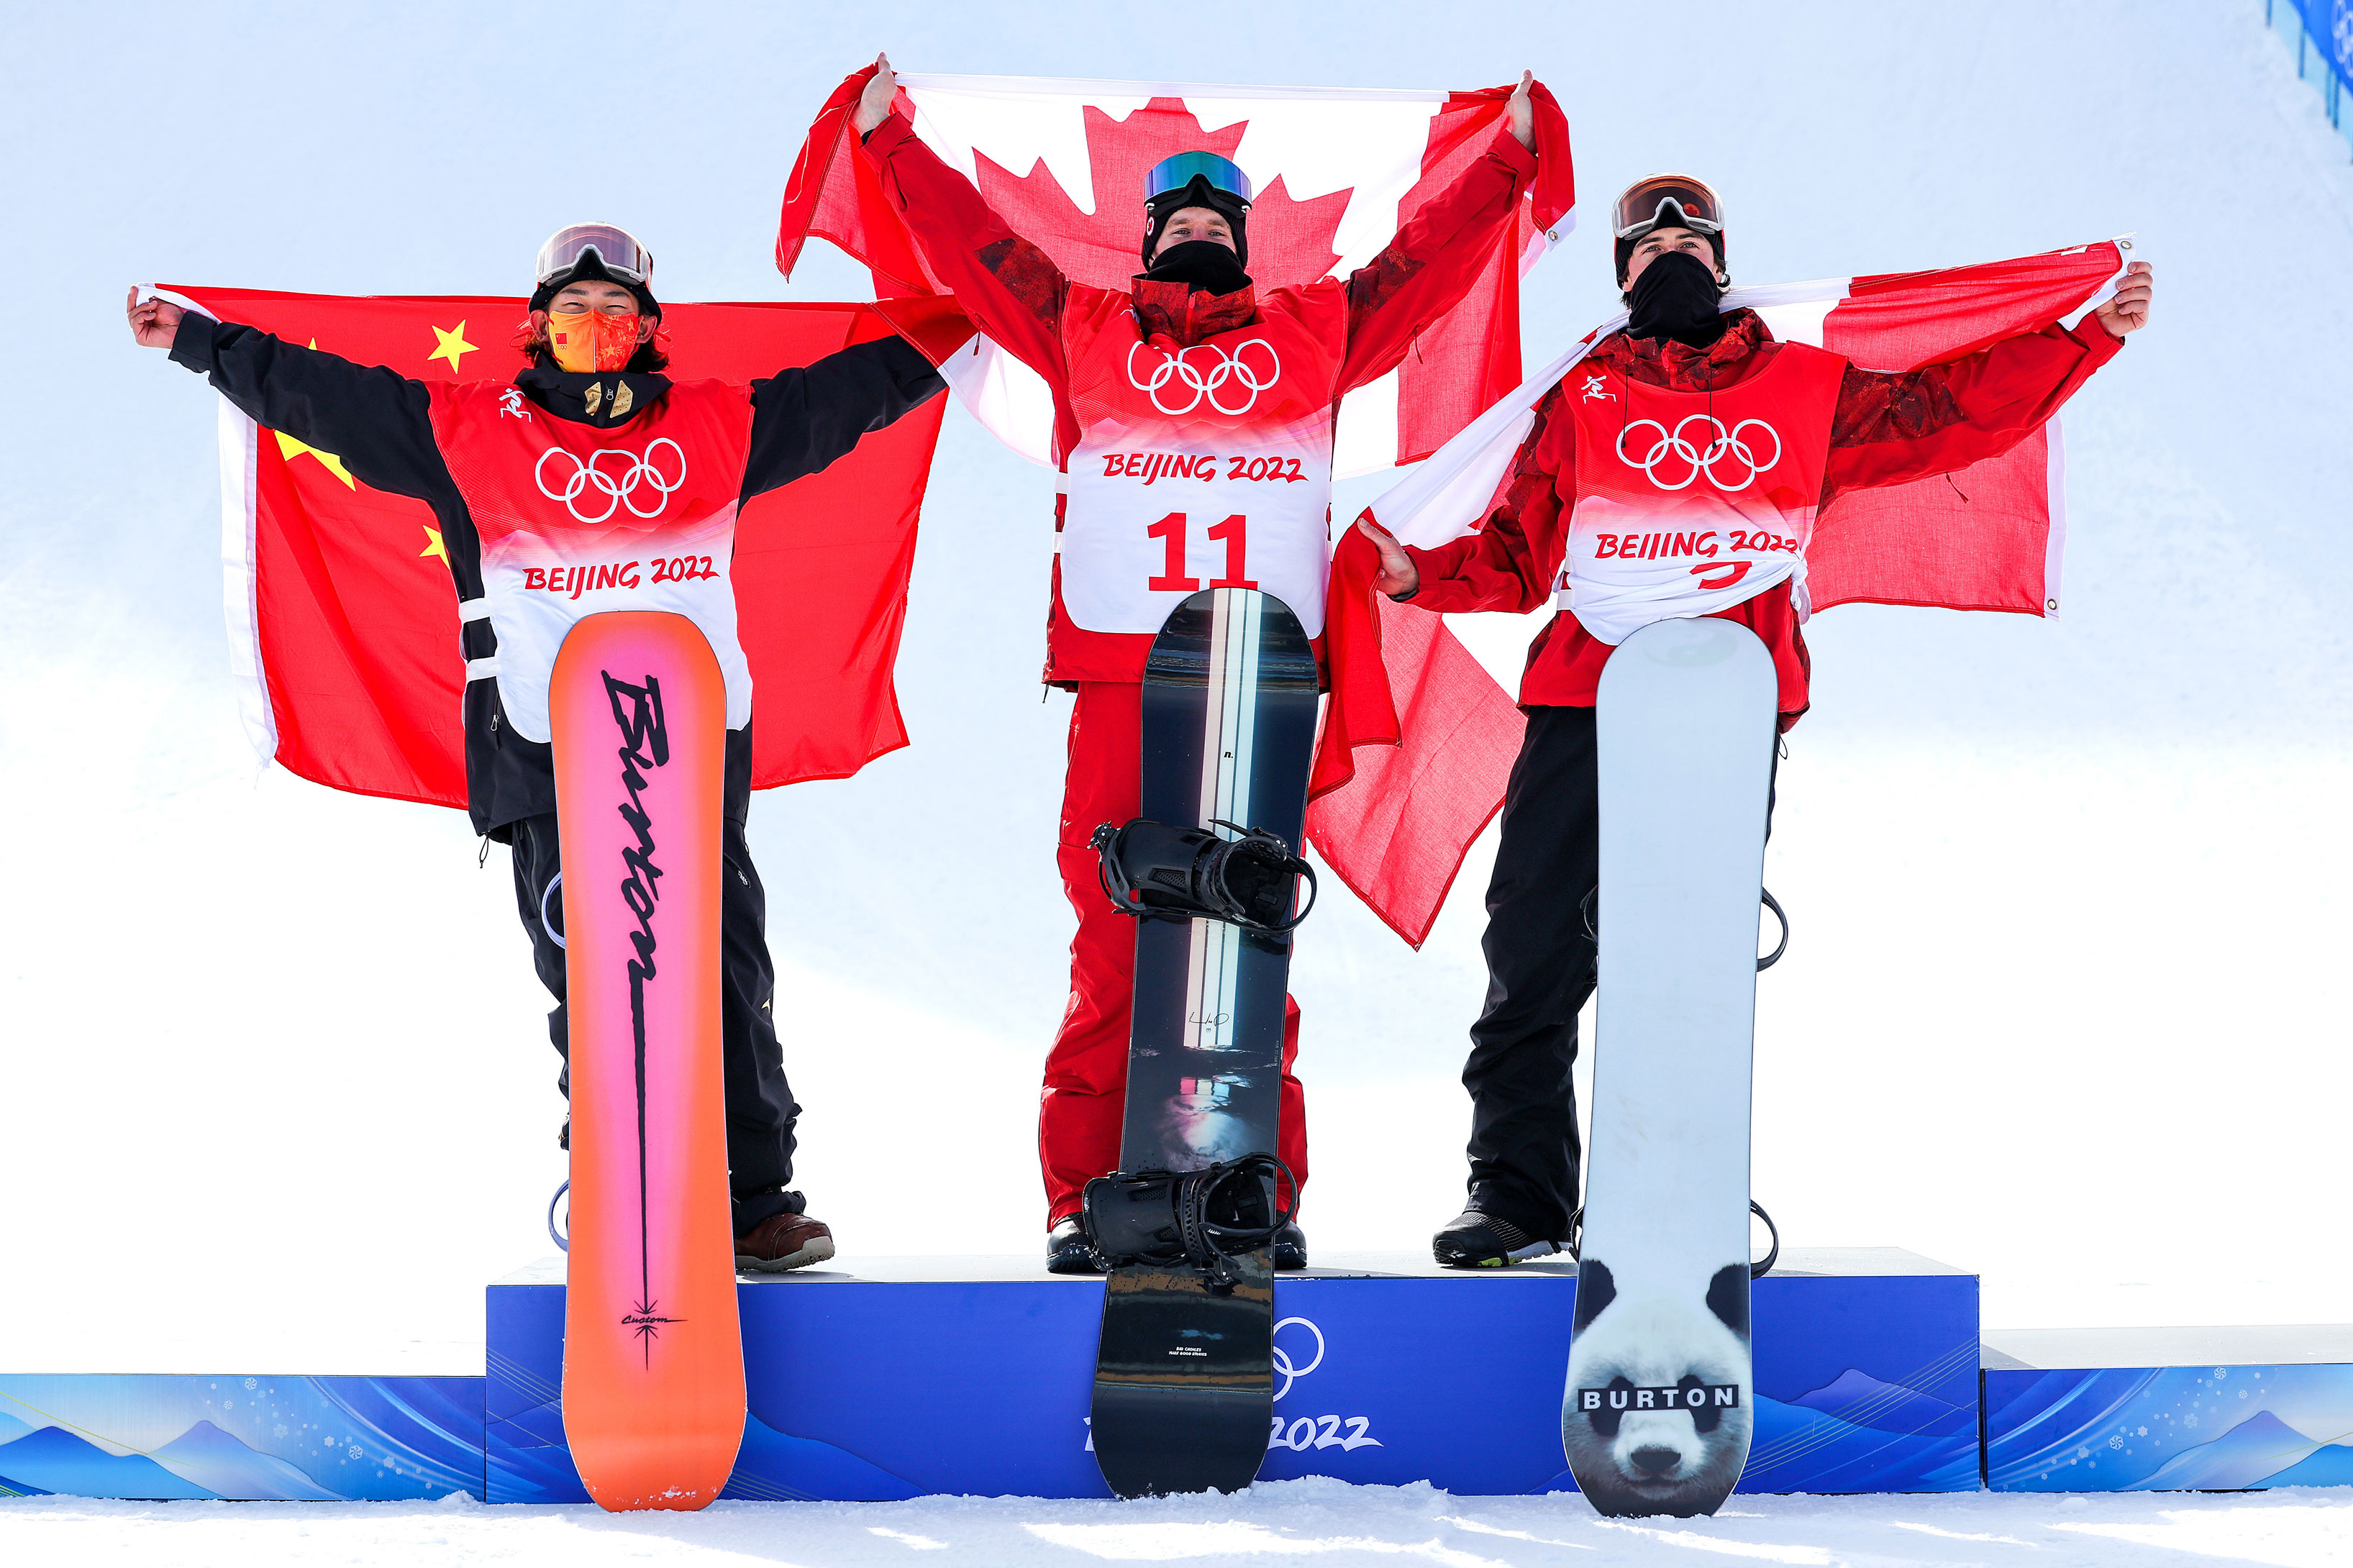 Medal winners Su Yuming (silver) from China, and Canada's Max Parrot (gold) and Mark Morris (bronze) line up on the podium.